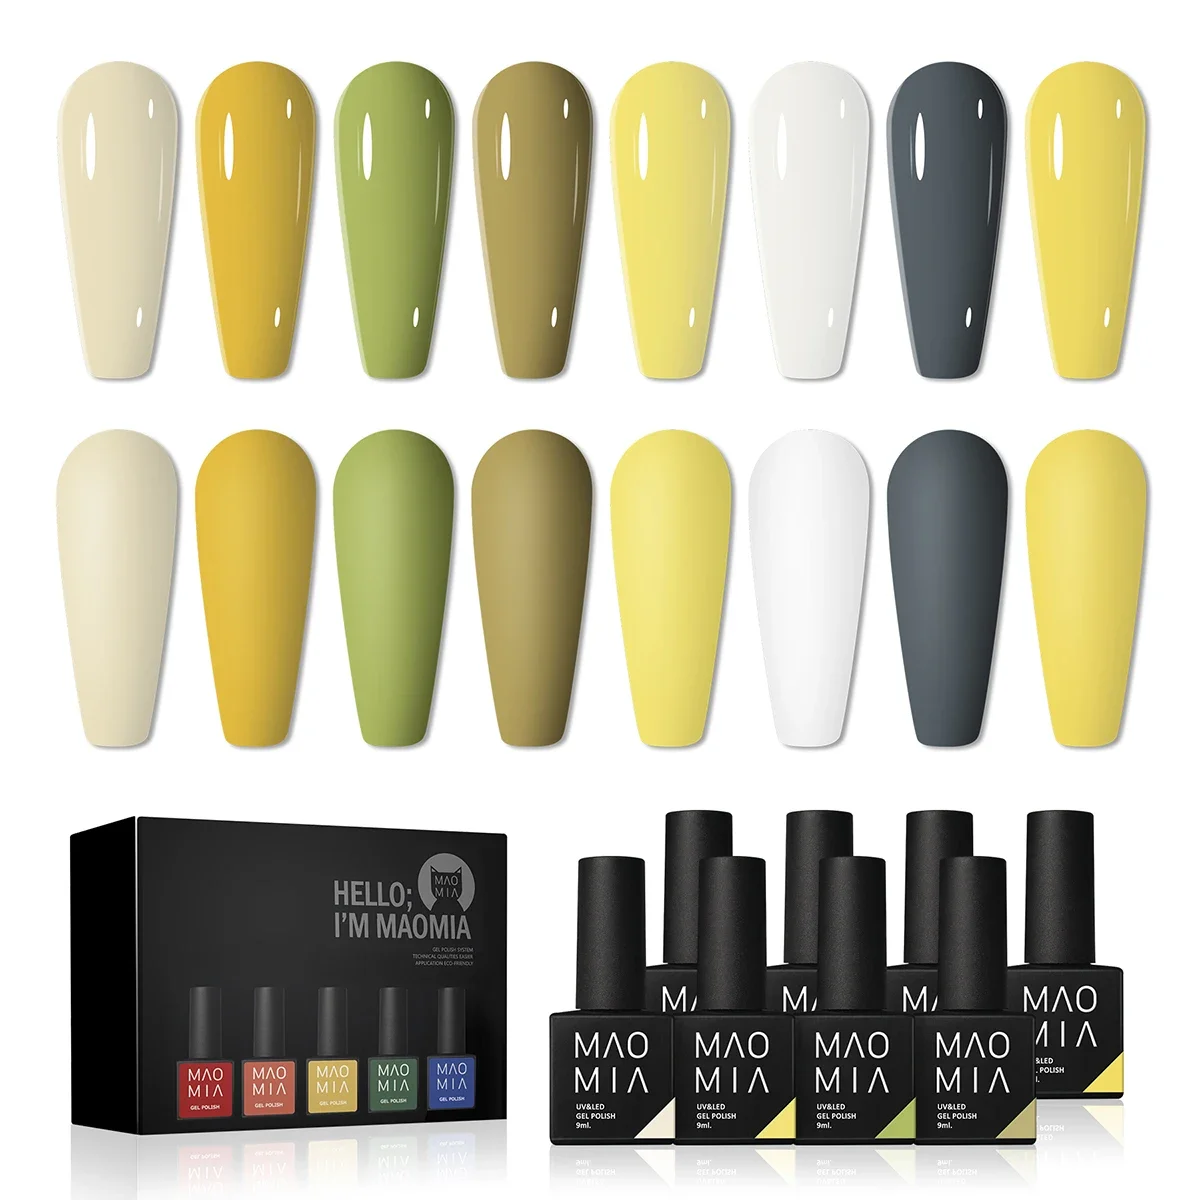 

9ML Gel Nail Polish Kit Glitter Gel Lacquer Set For Manicure Semi-Permanent Hybrid Varnishes Base And Top Nail Art Gel